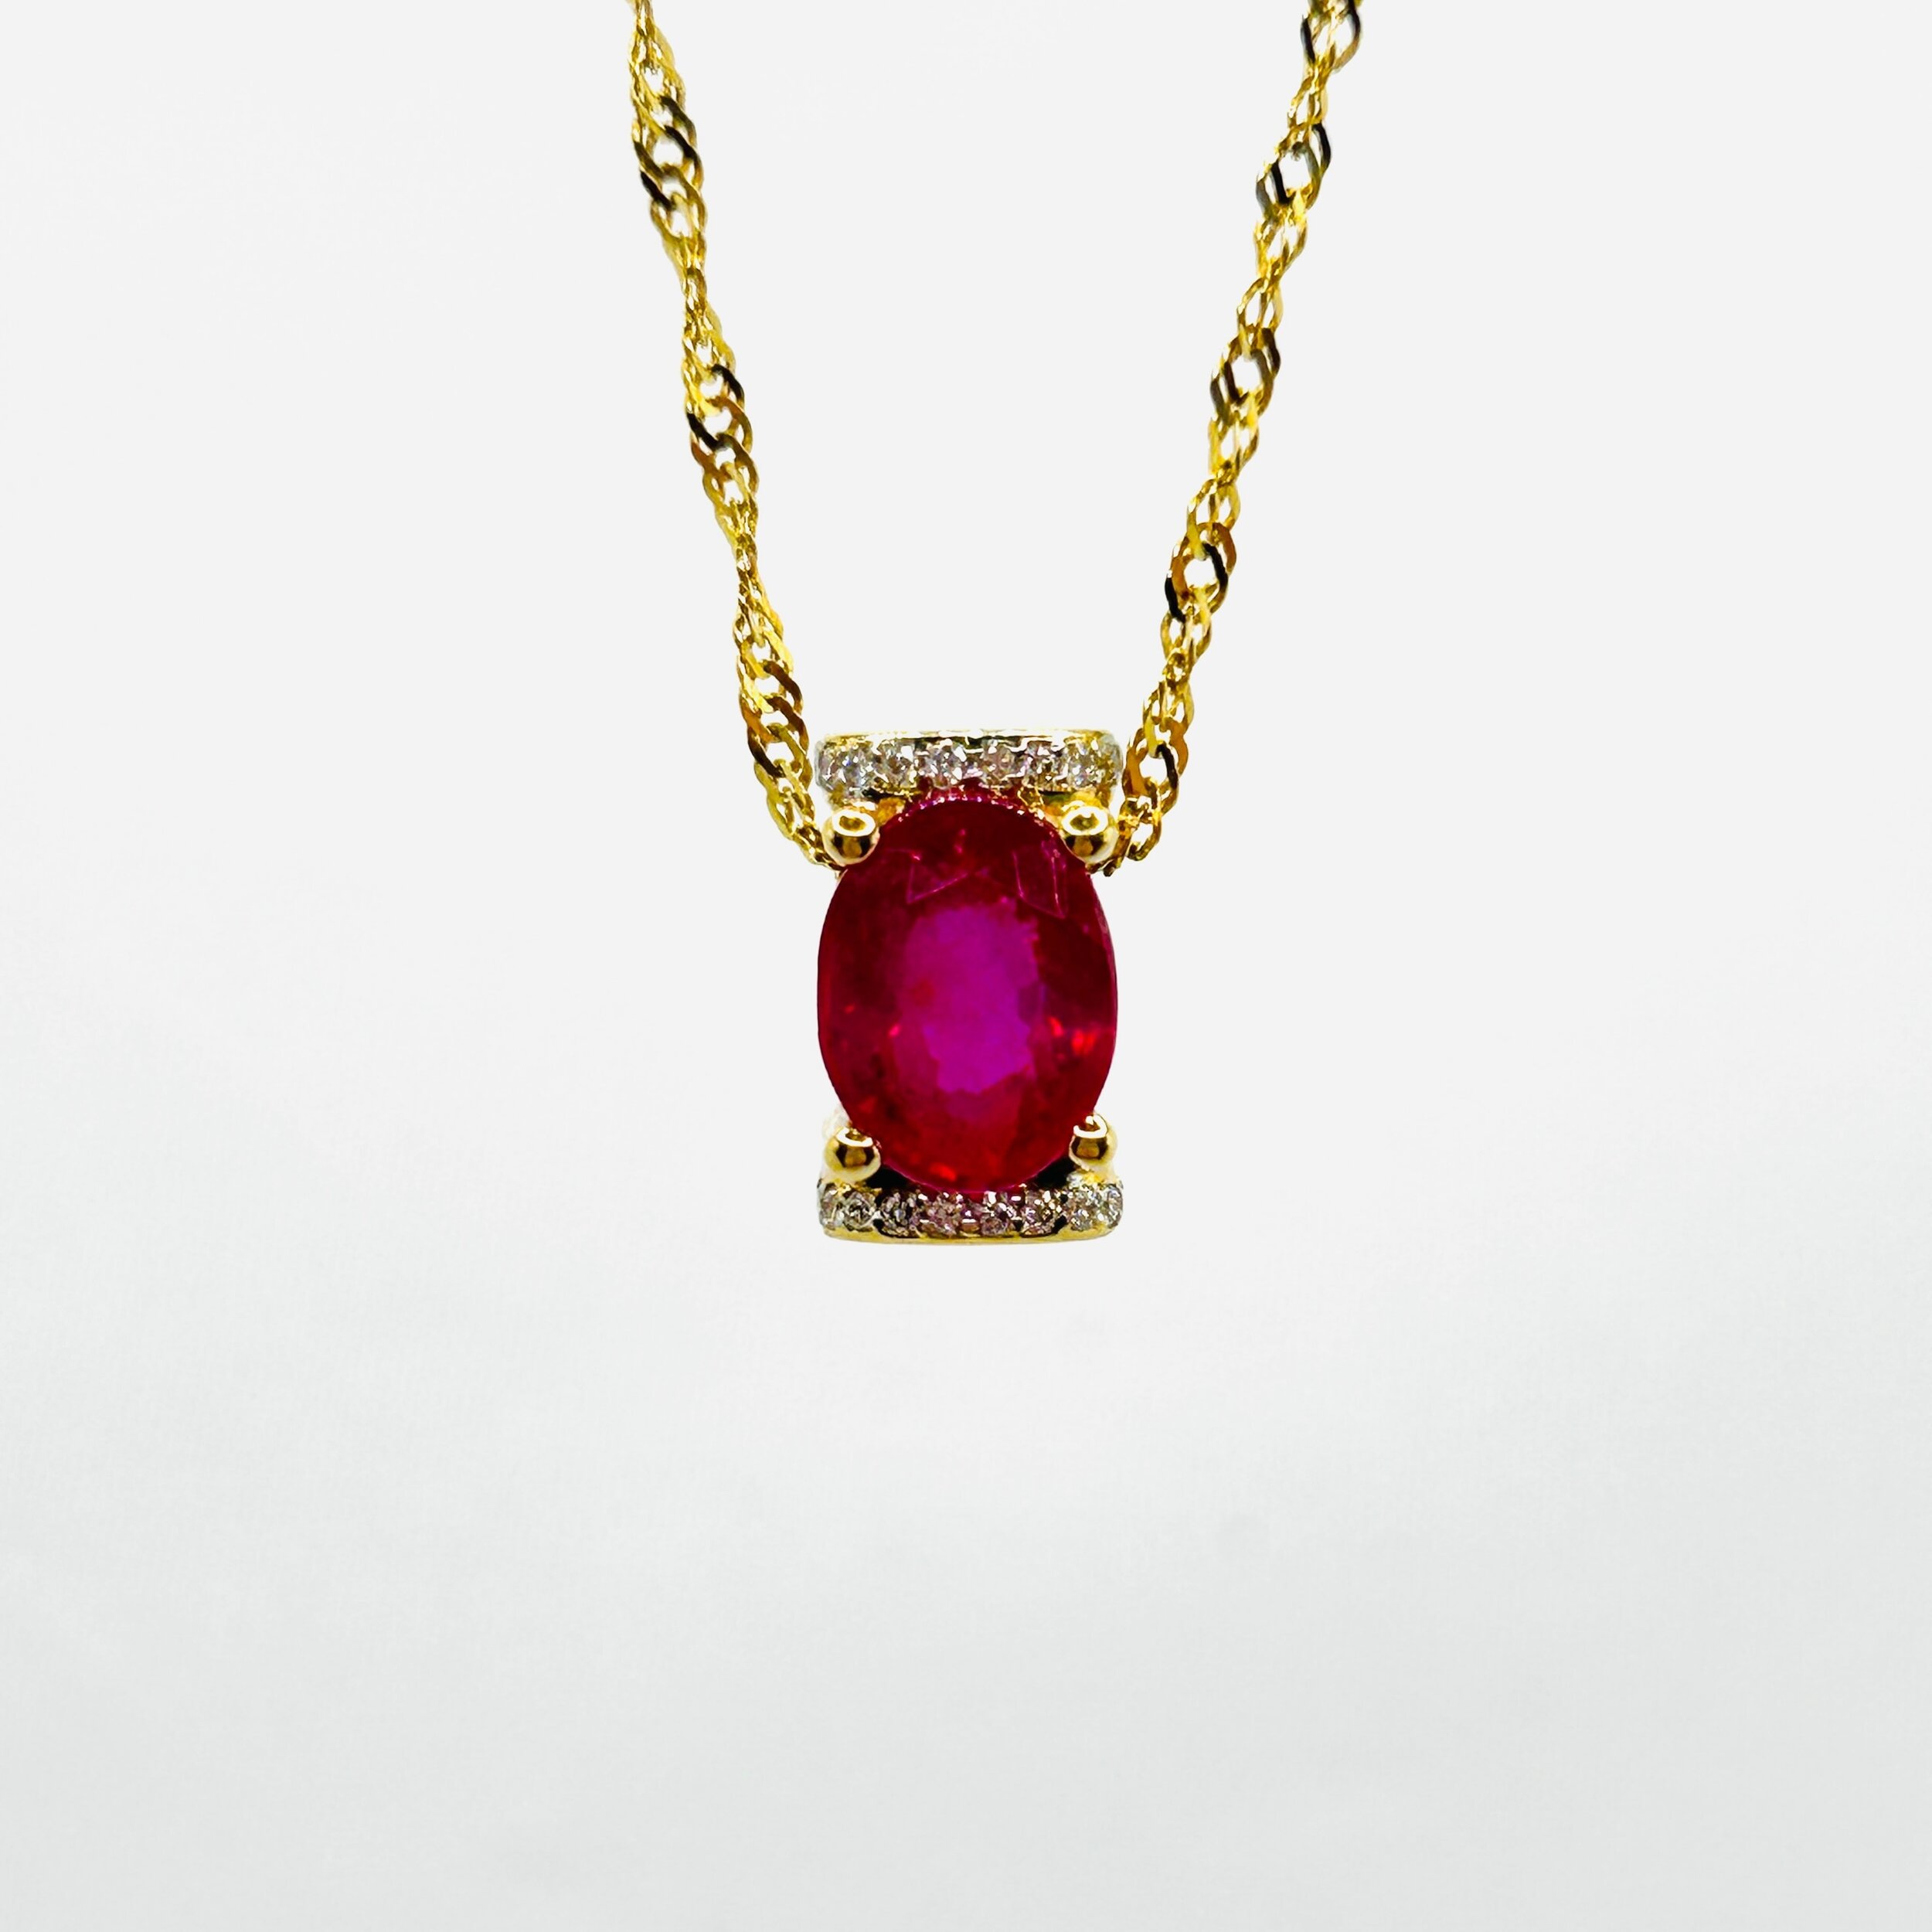 18K yellow gold Ruby pendant with Diamonds 

Need more information?
Please message us.

#finejewel #gold #earring #ring #necklace #everyday
#18k #18kgold #18kwhitegold #whitegold #jewellery #jewelry #canadianmade #craftsman
#love #vyi #localbusiness 